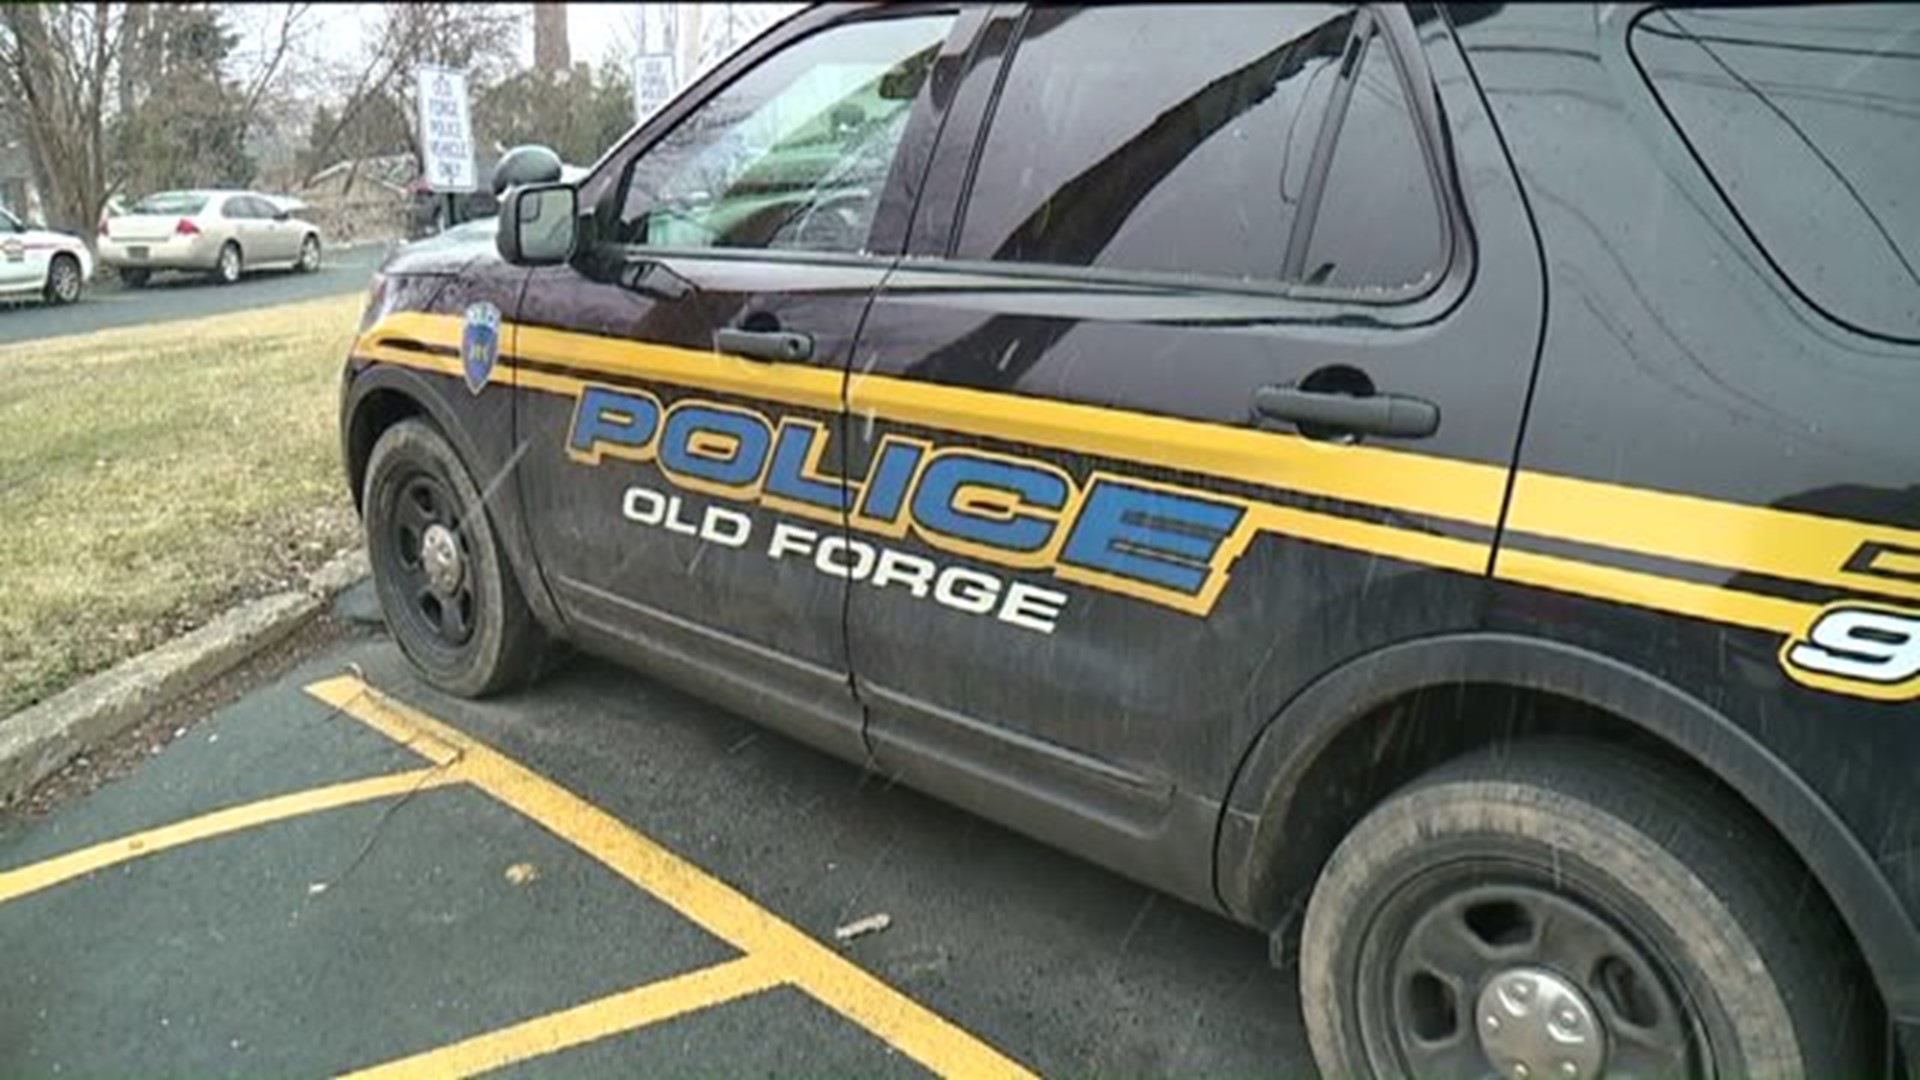 Old Forge, Former Police Chief Win Civil Trial